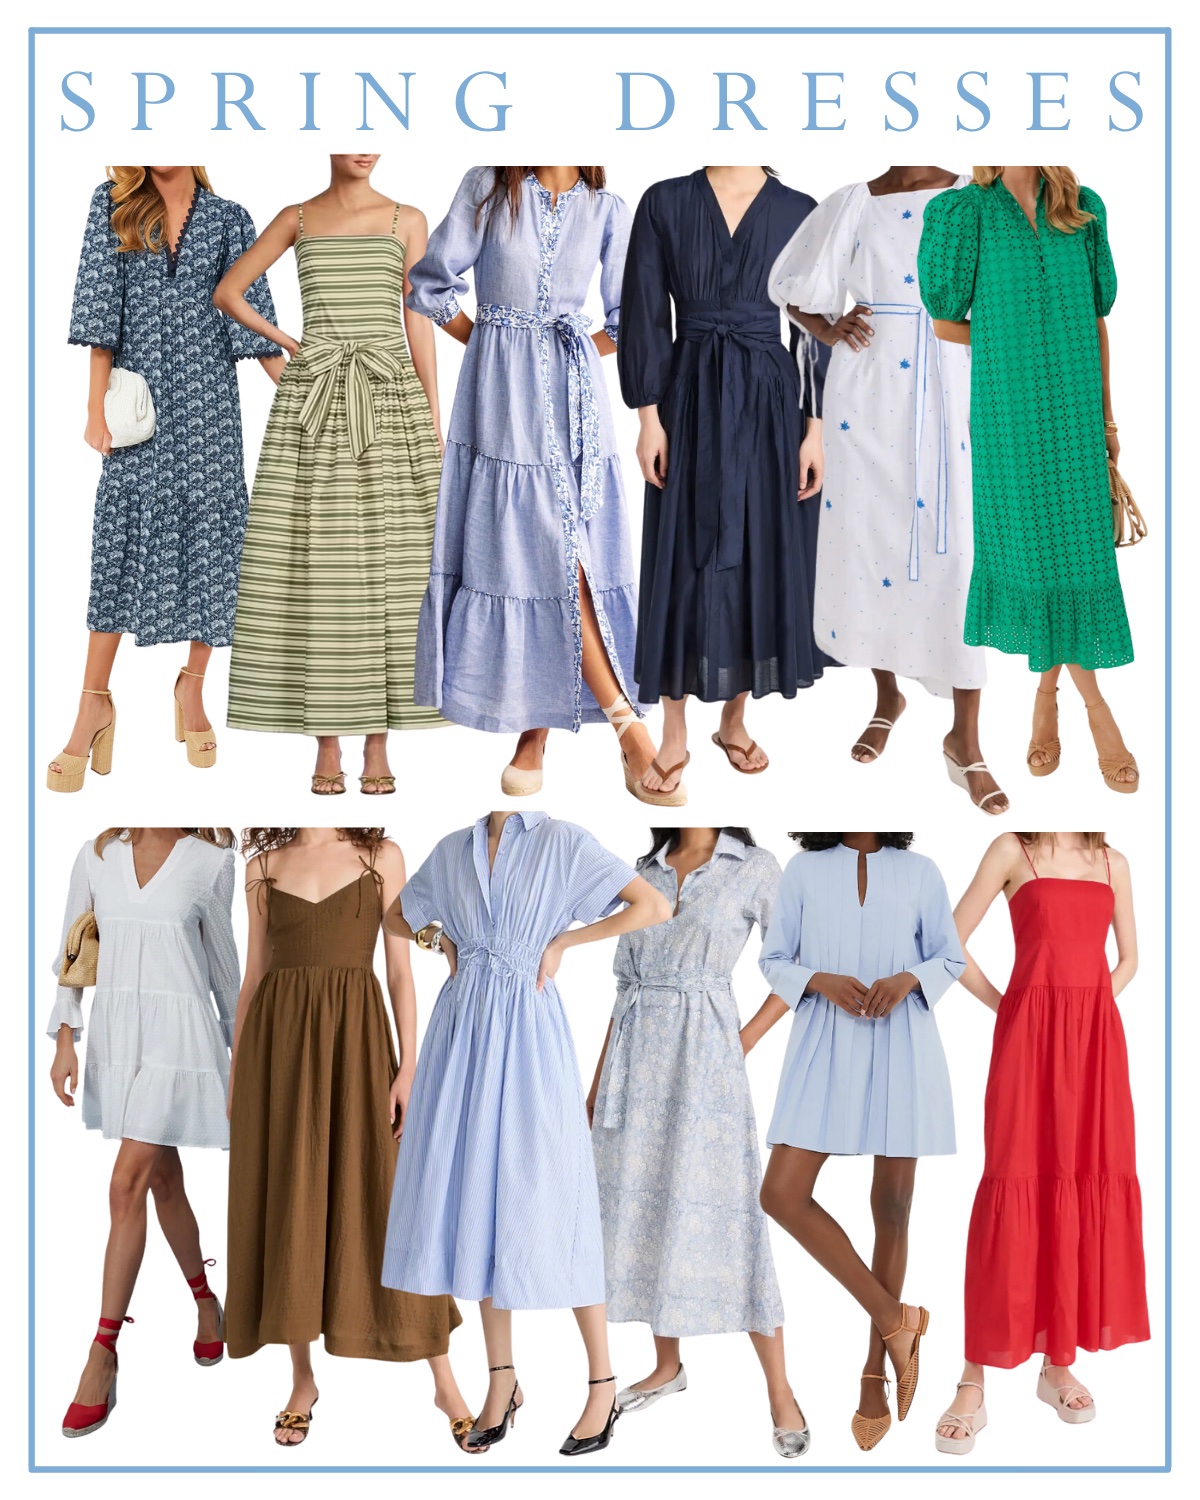 spring dresses for women 2024 from tuckernuck, boden, wyeth, fanm mon, english factory, j.crew, marea, and antonio melani x the style bungalow